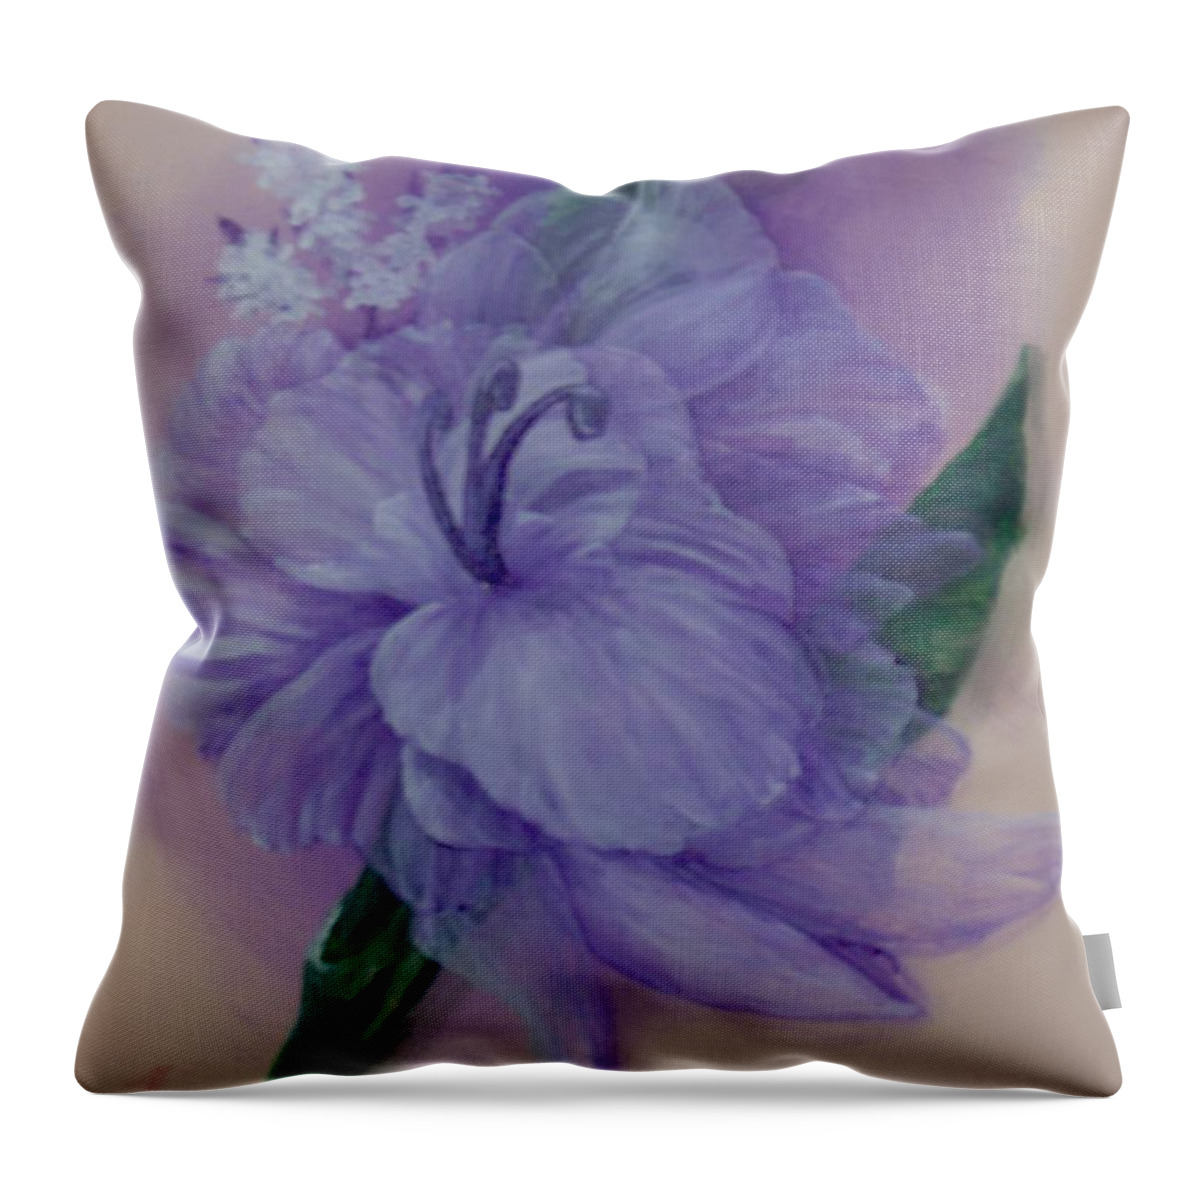 Flower Throw Pillow featuring the painting Delicacy by Saundra Johnson